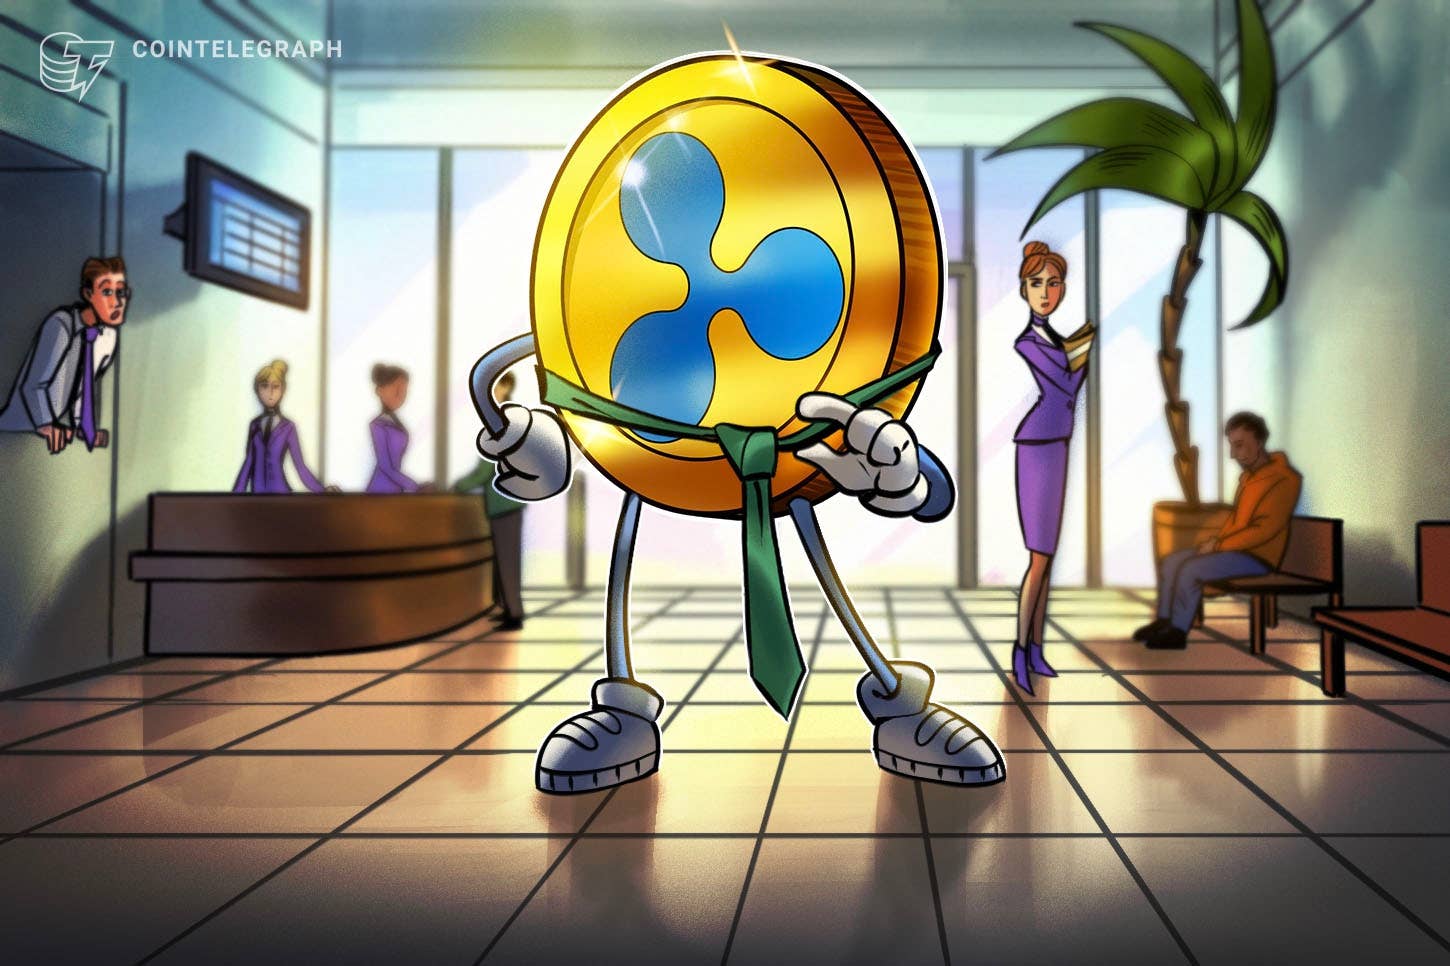 Ripple launches $250M fund for NFT creators